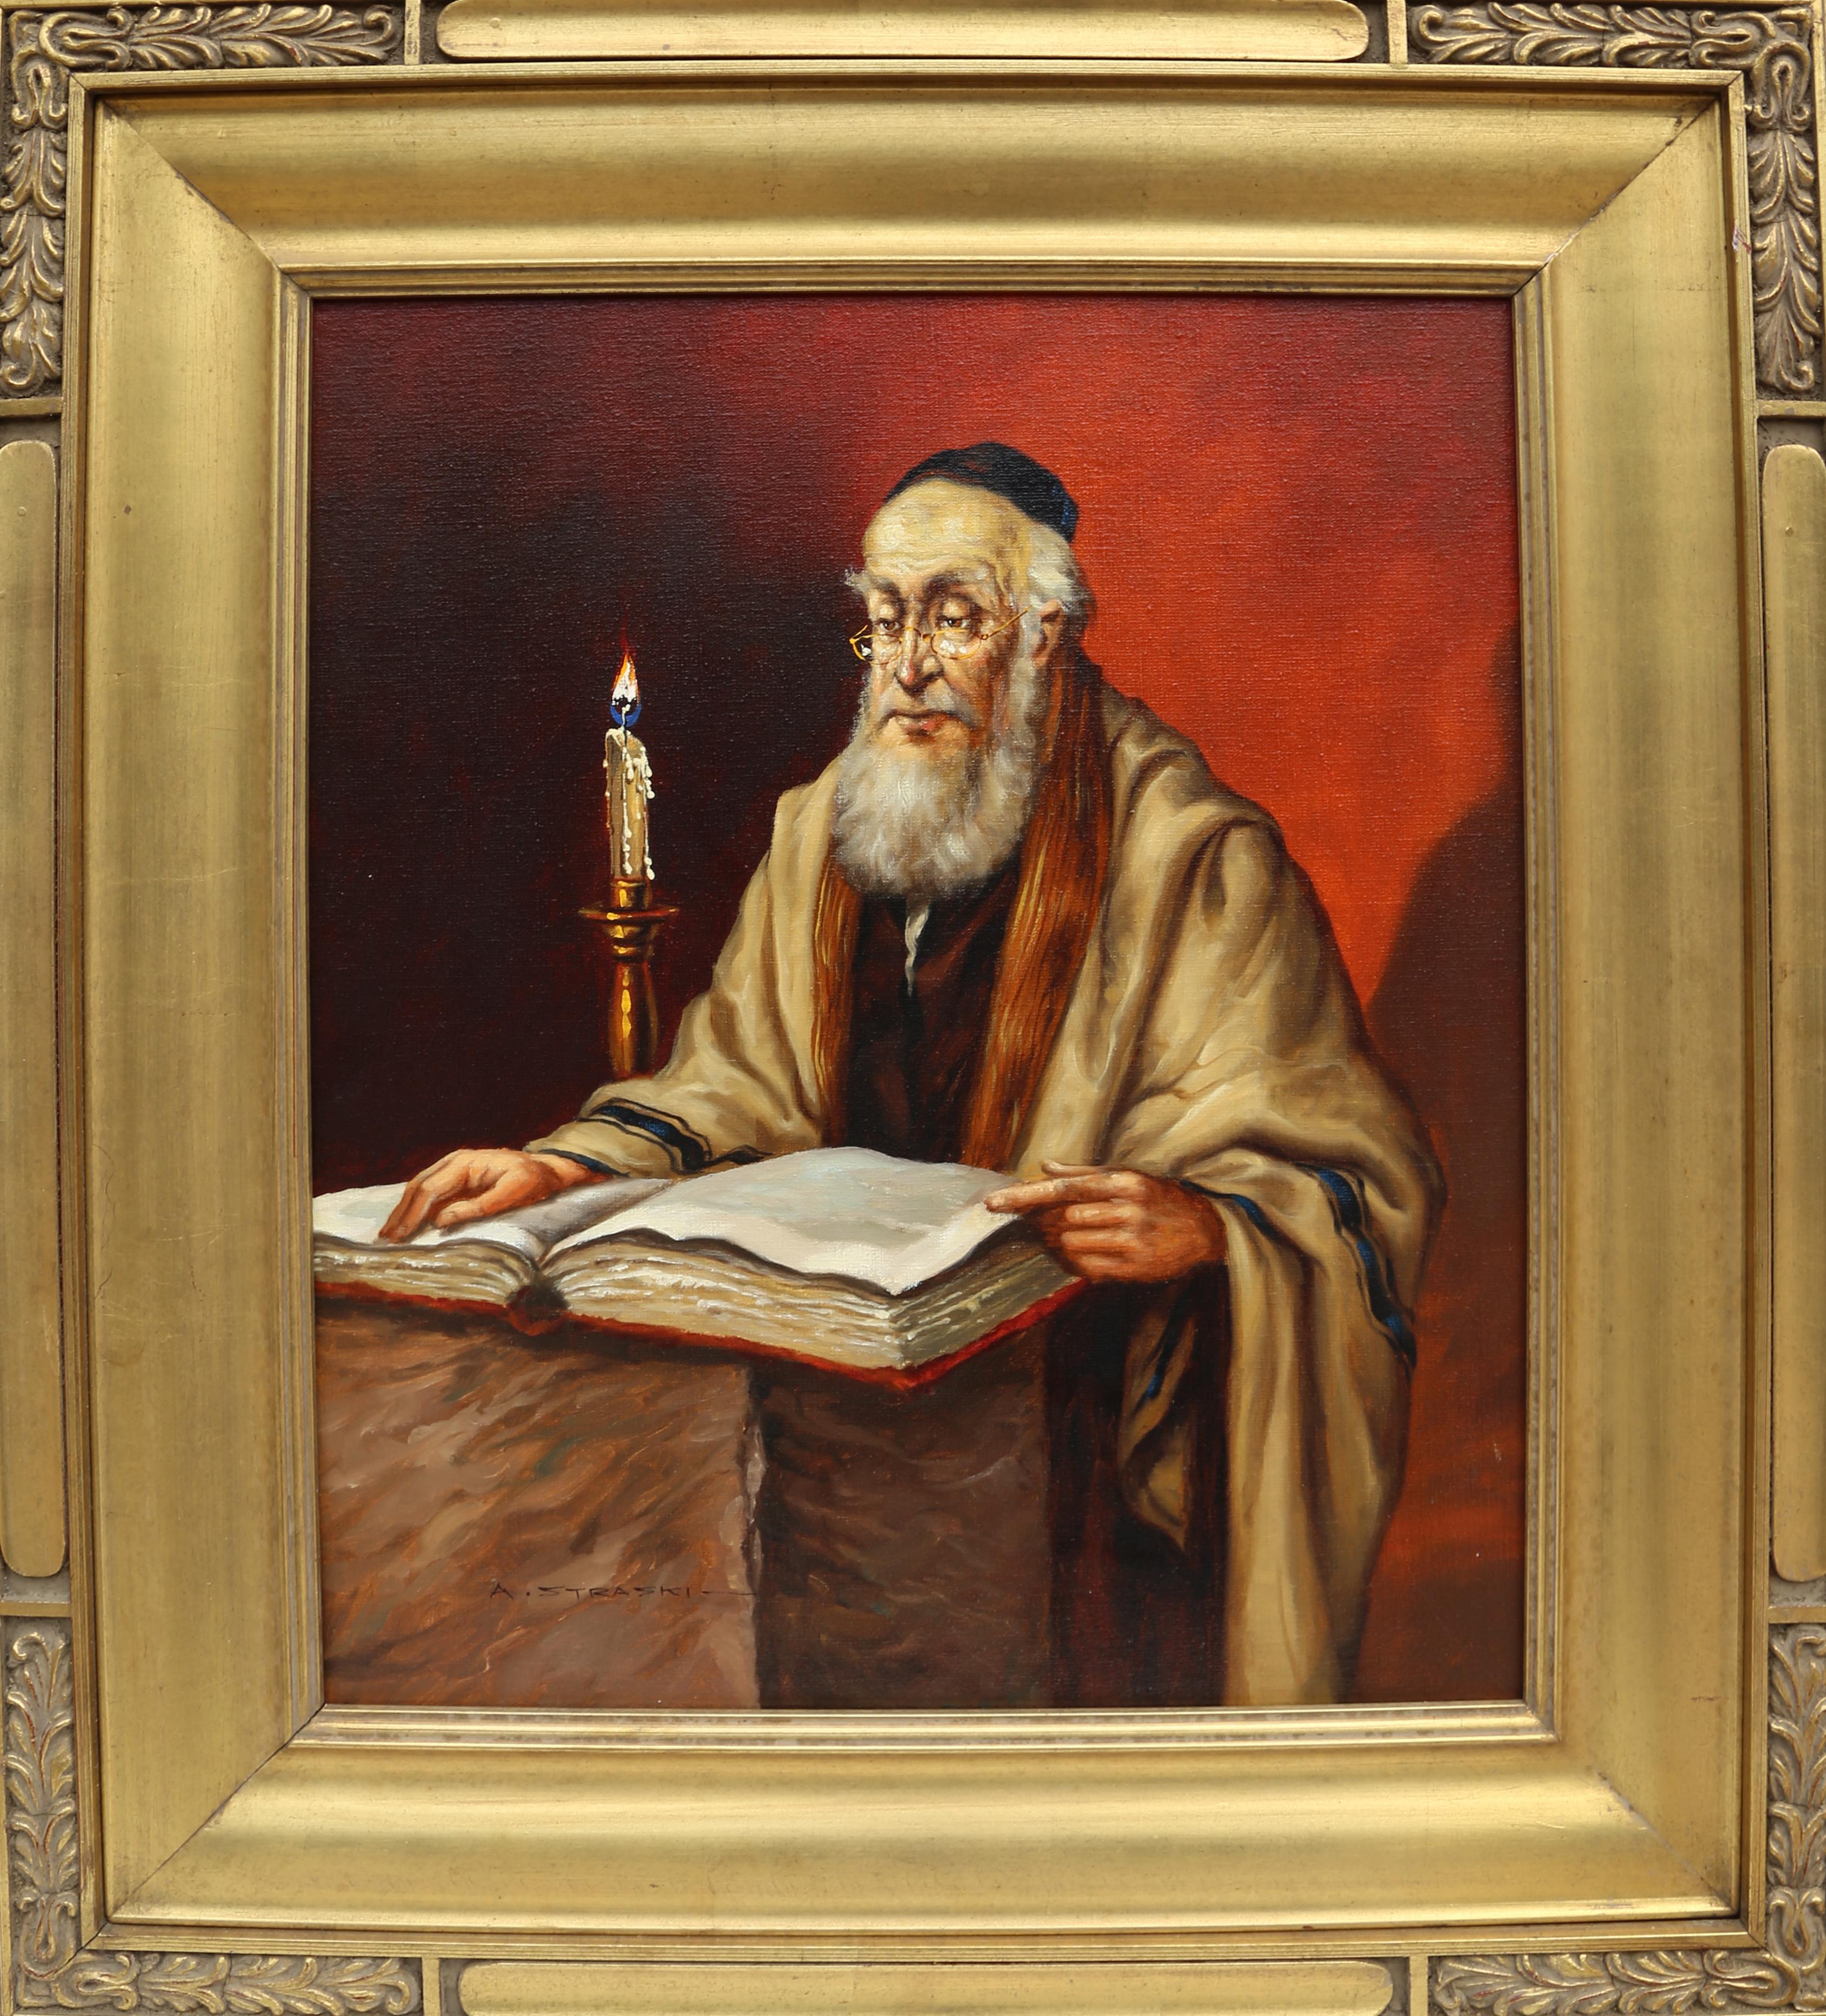 Rabbi Reading by Candlelight, Oil Painting by Abraham Straski, 1959